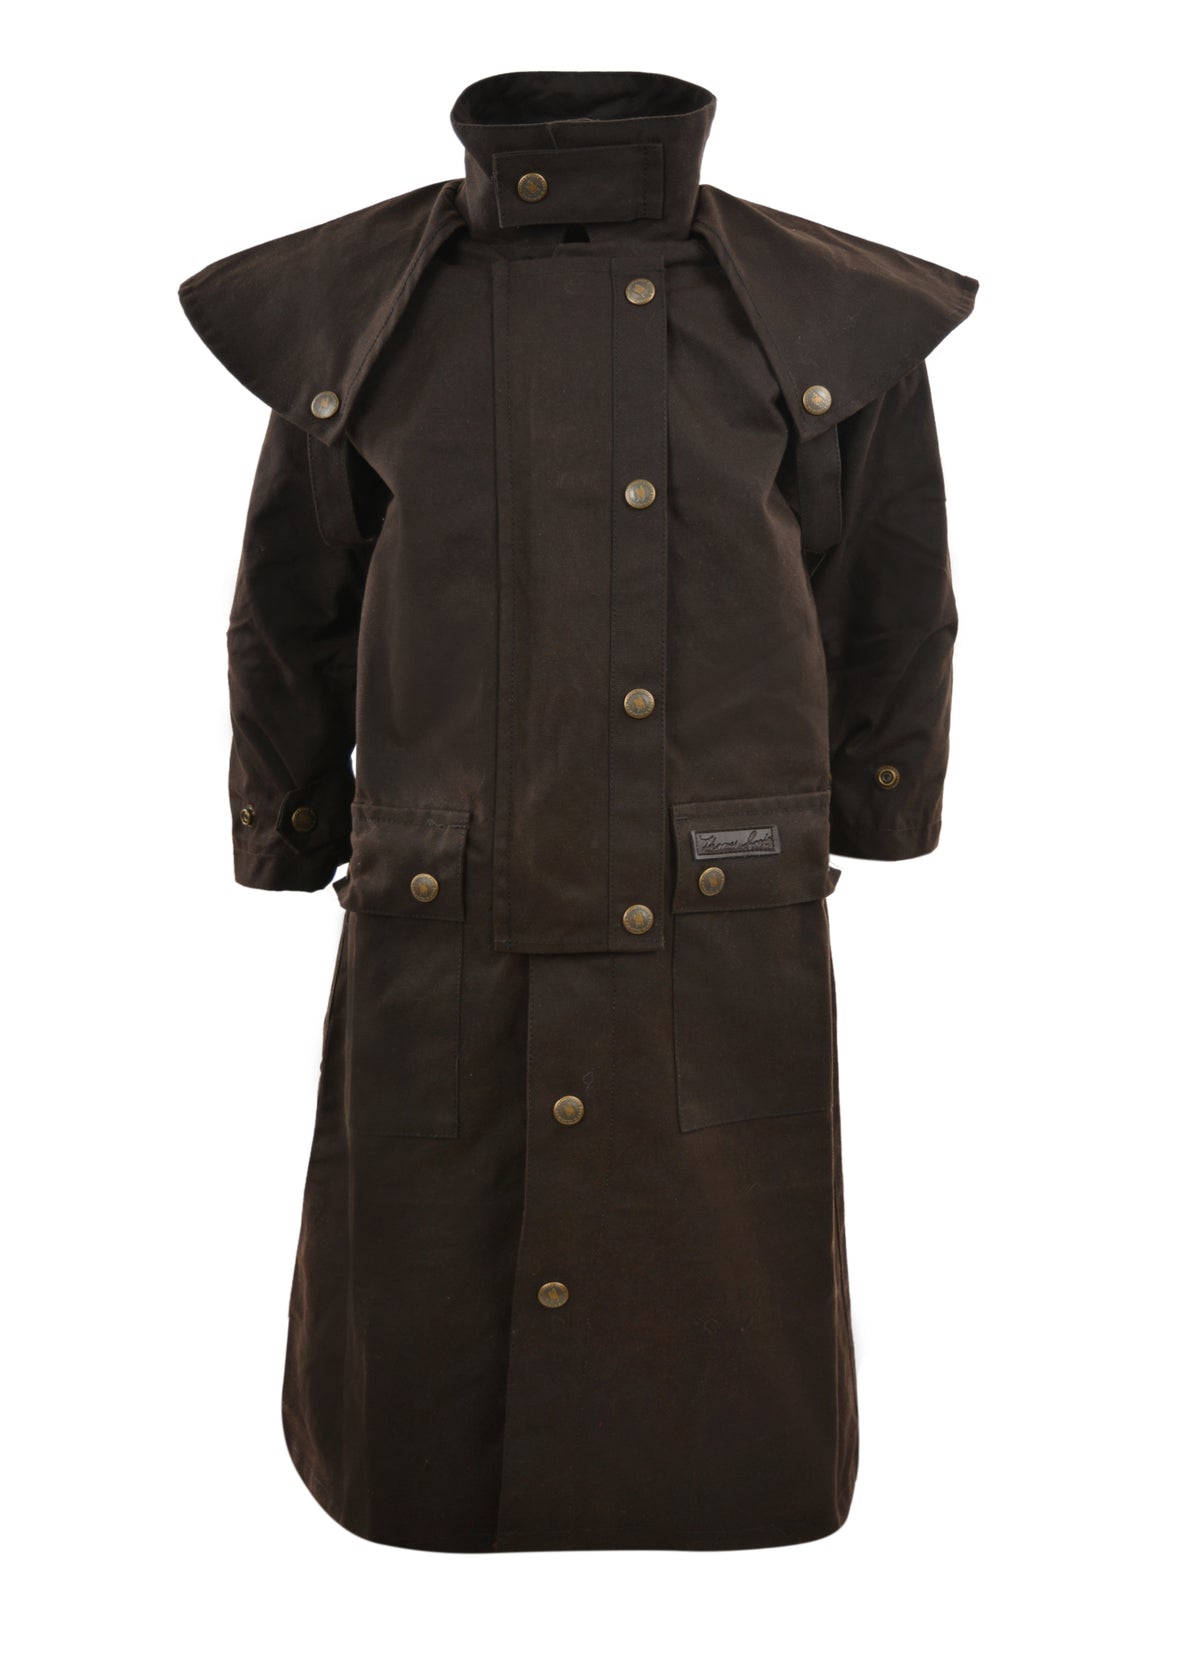 Thomas Cook Kids High Country Oilskin Long Coat - Rustic Mulch